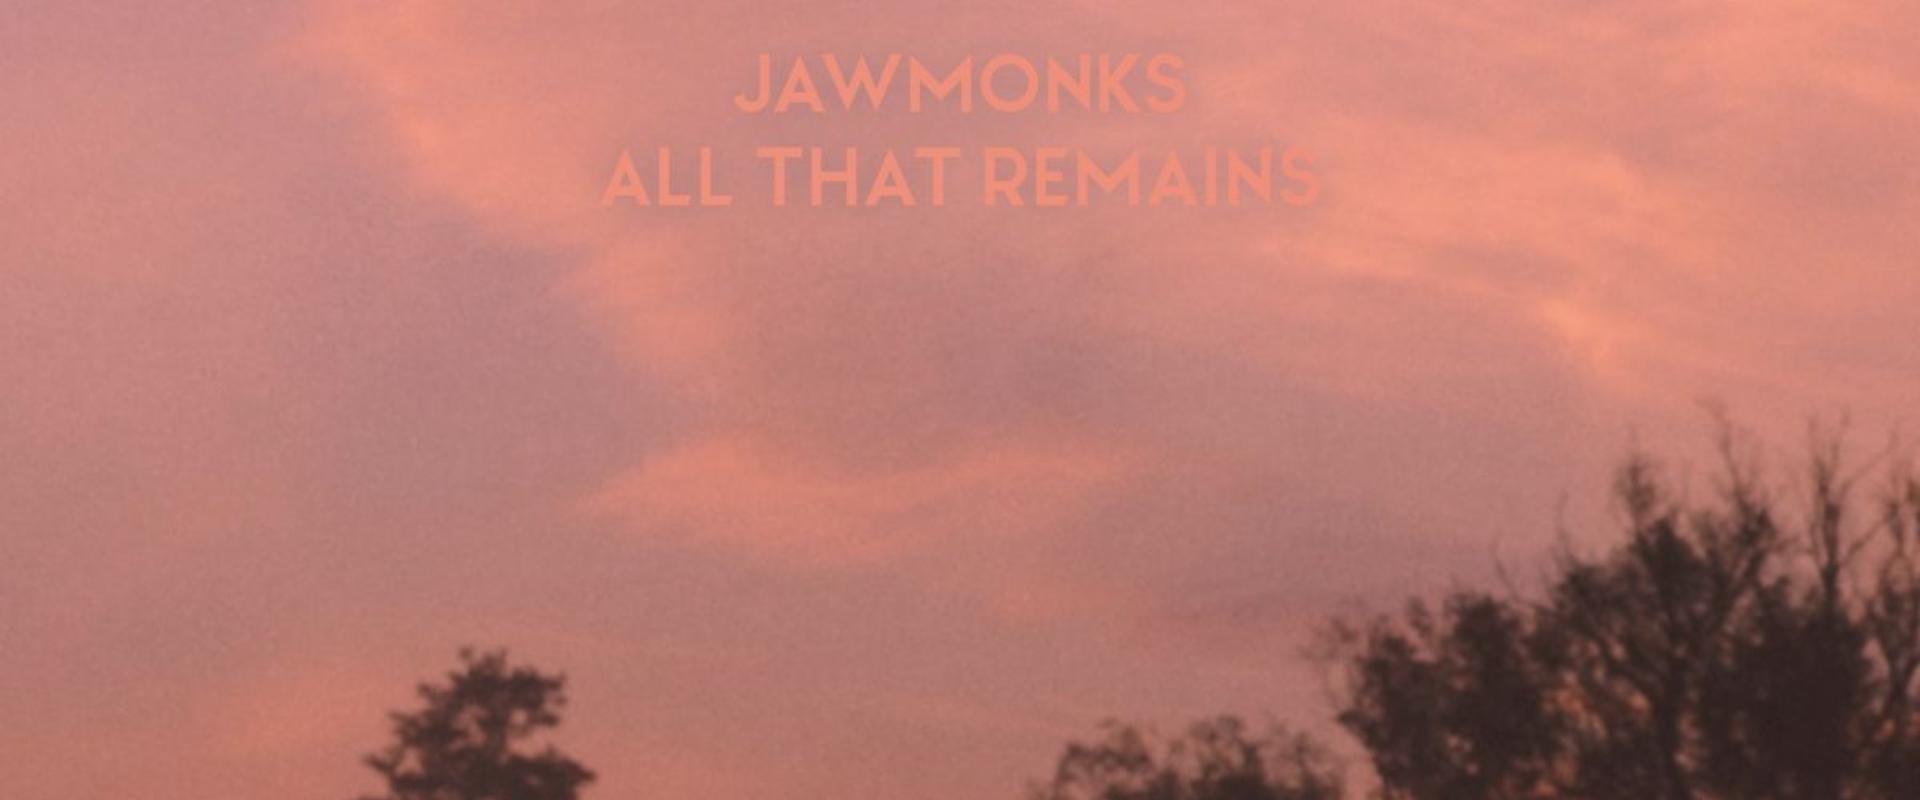 Jawmonks - All That Remains